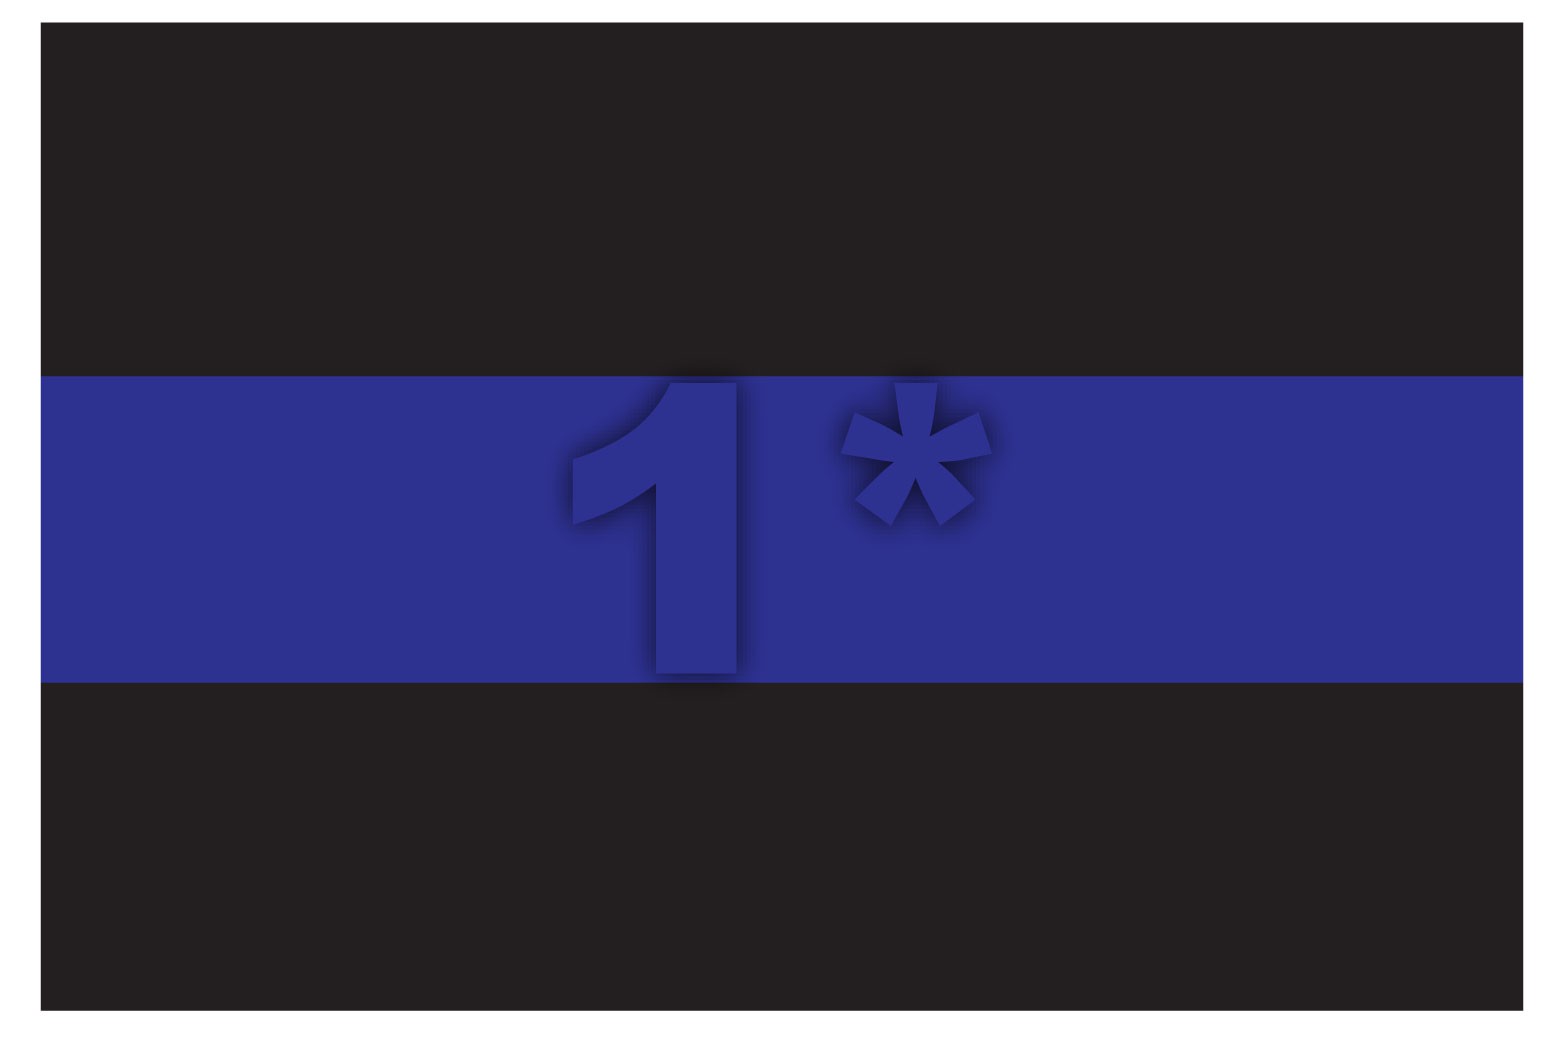 Thin Blue Line Rectangle - 1* (1 Asterisk) - Fire Safety Decals